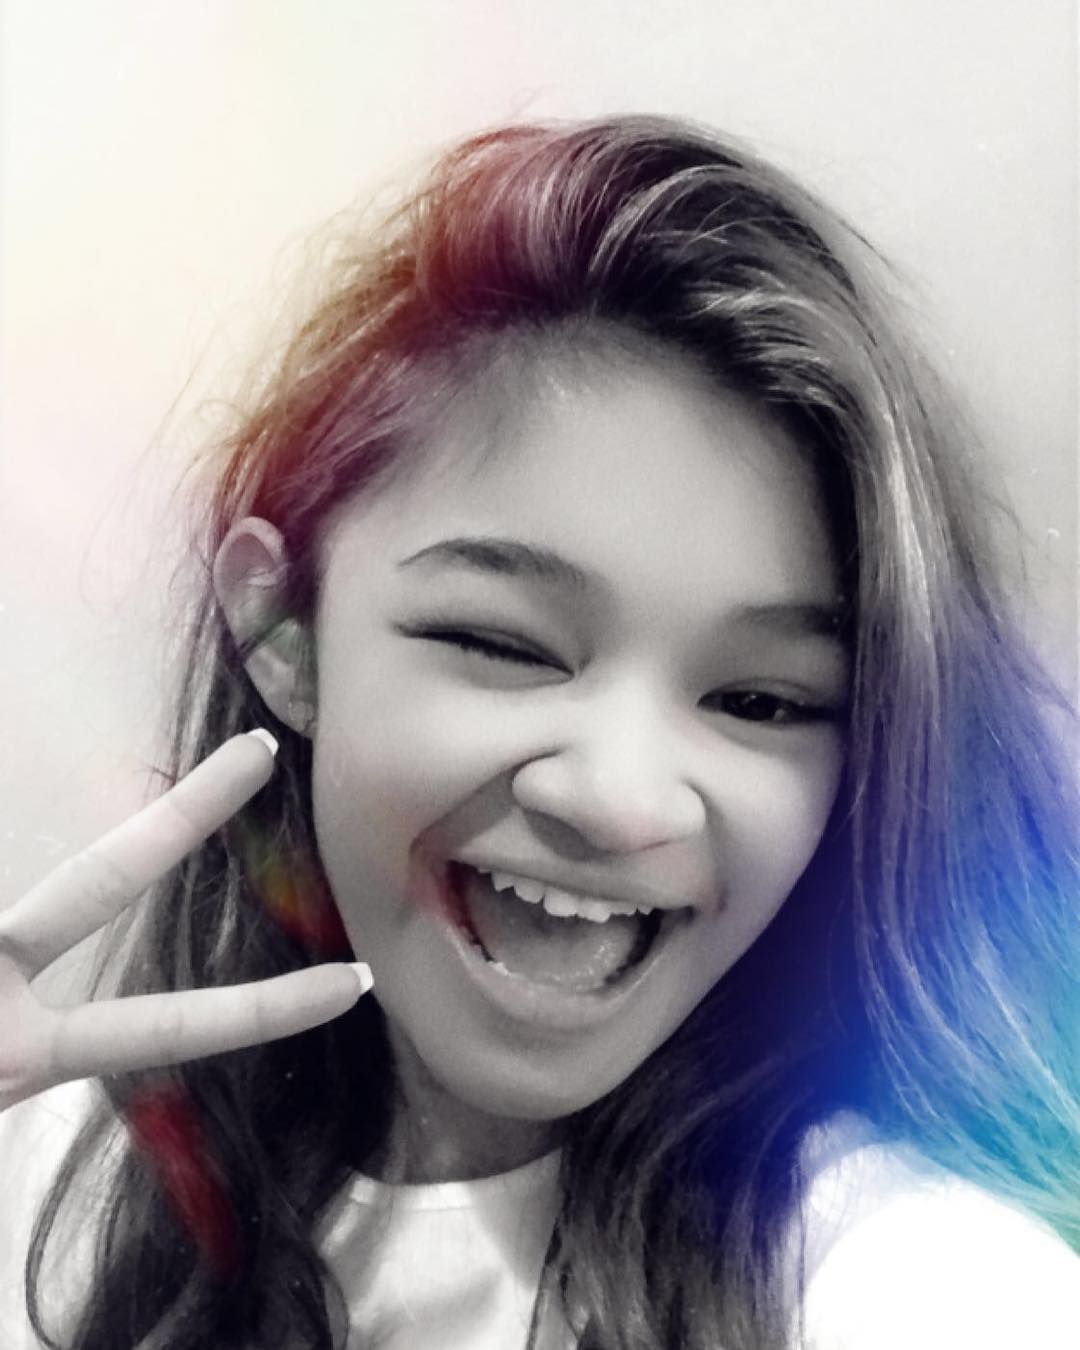 Angelica Hale on Instagram: “Heyo everyone! How's your week been? ;) I hope it's been good, cause mine has!